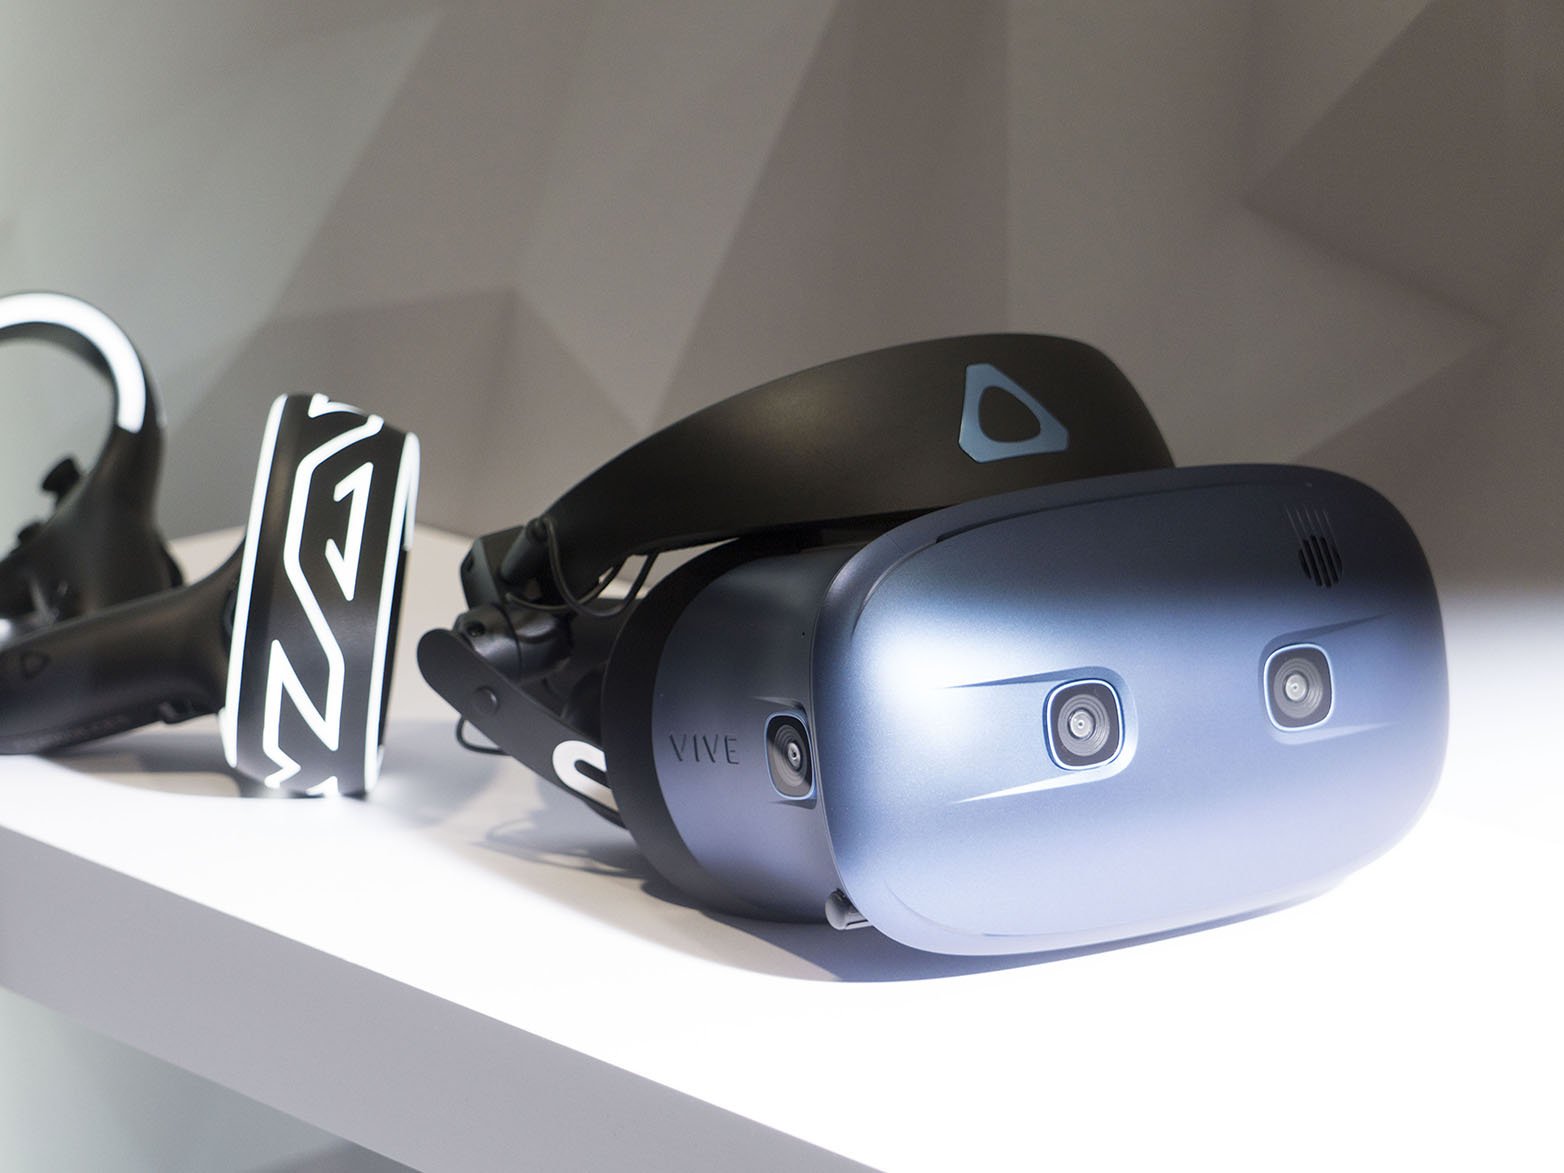 HTC reveals Vive Cosmos, a new VR headset with inside-out tracking